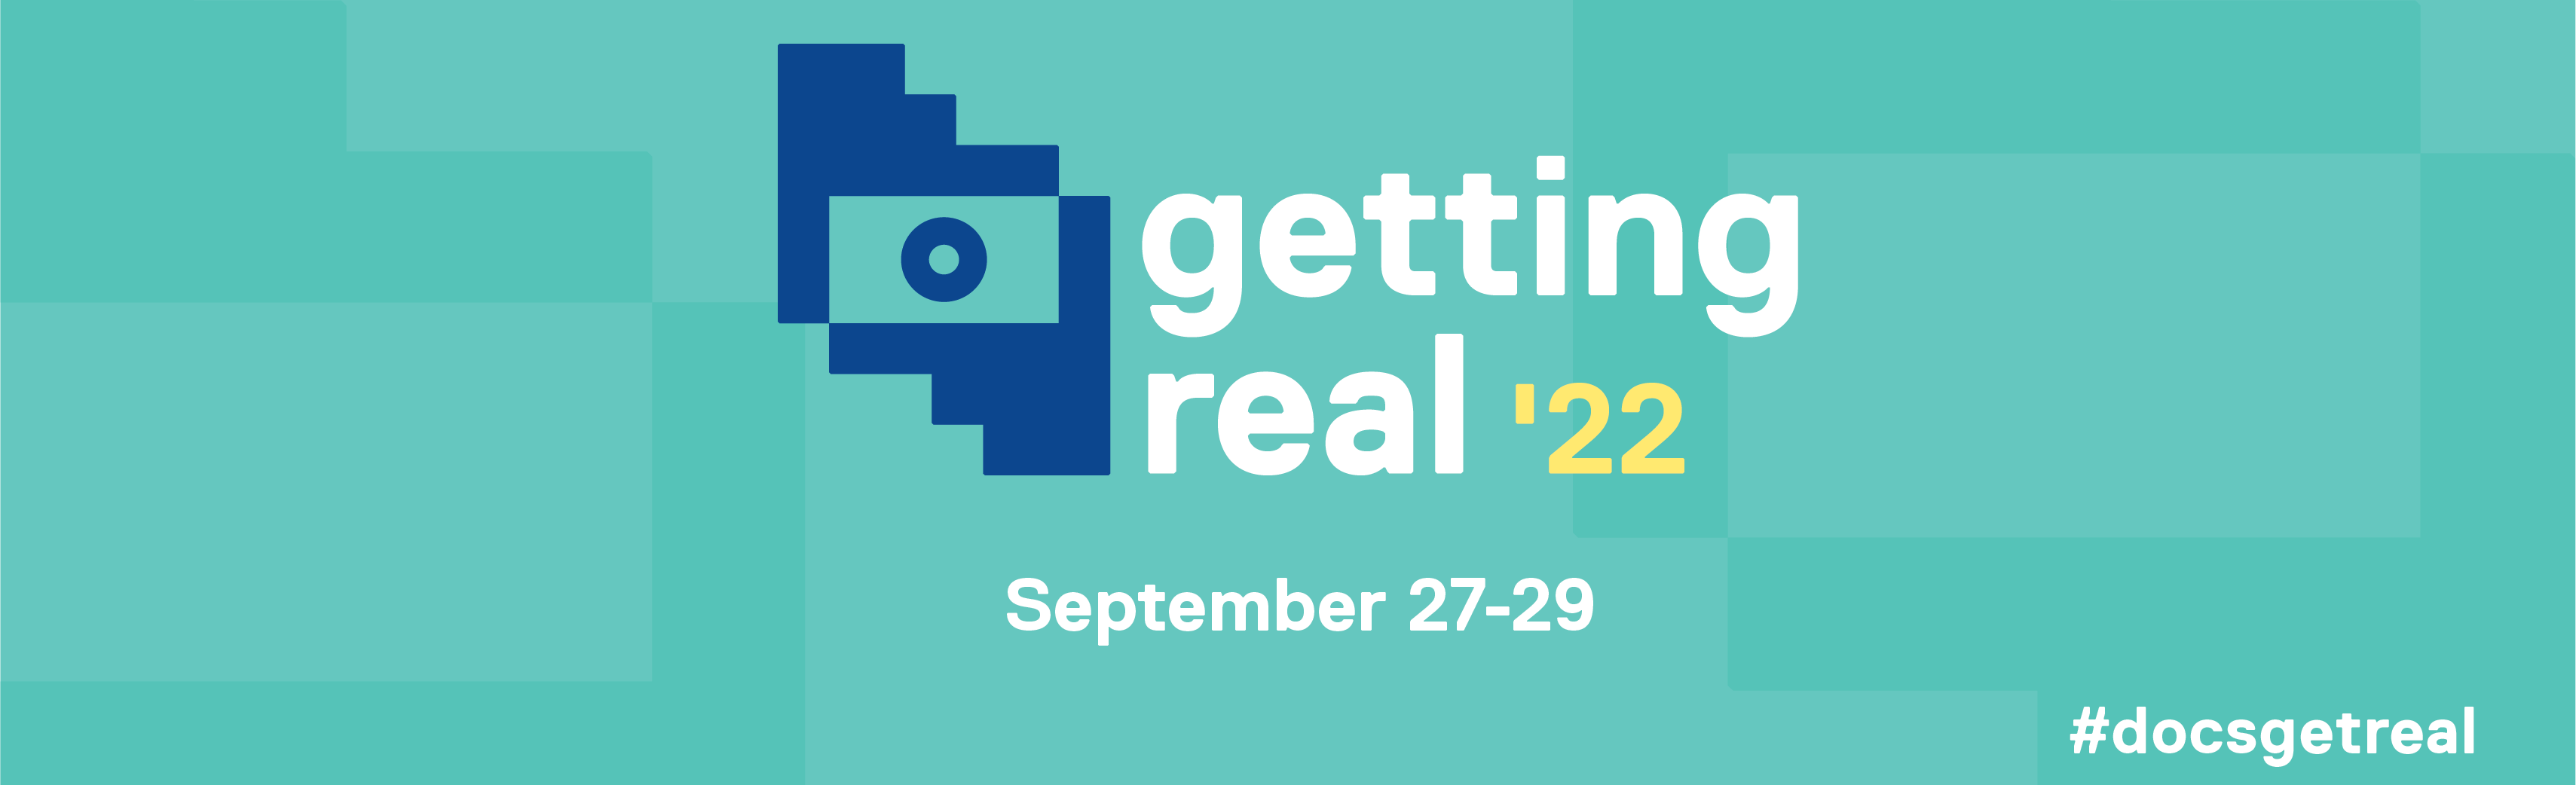 Green and blue banner for Getting Real conference with dates September 27-29. 2022 and hashtag docsgetreal.